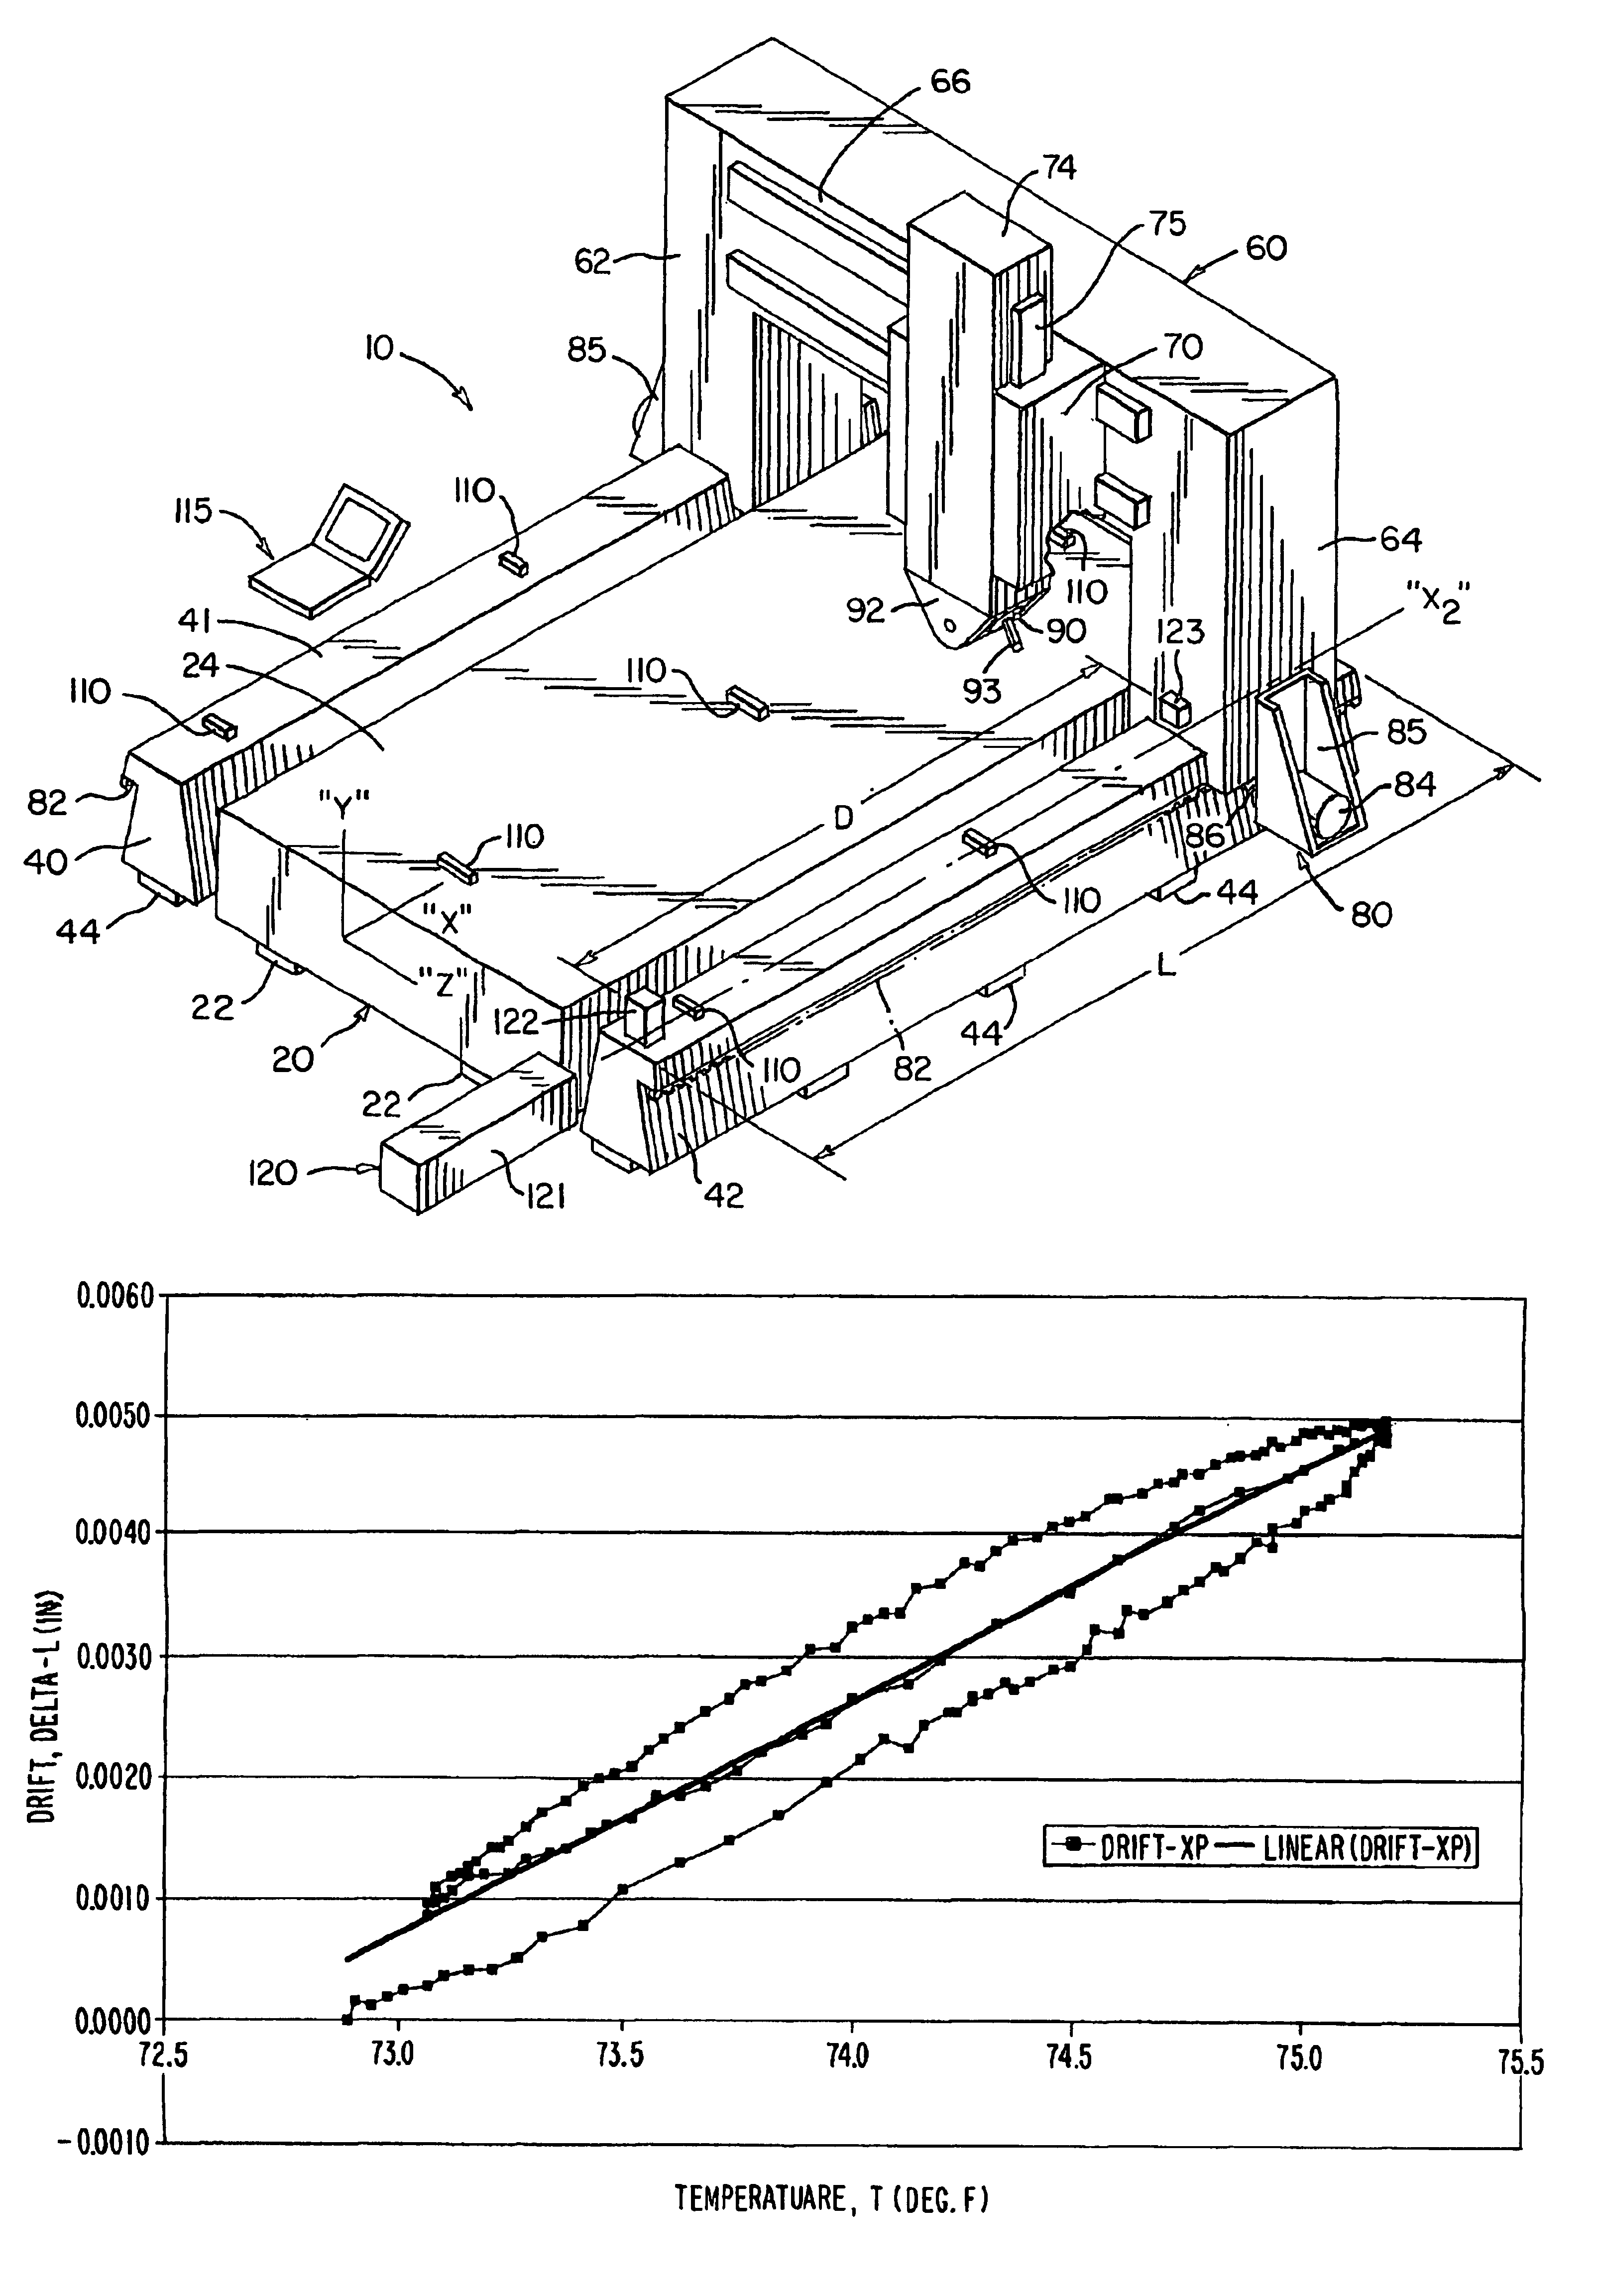 Method for determining effective coefficient of thermal expansion